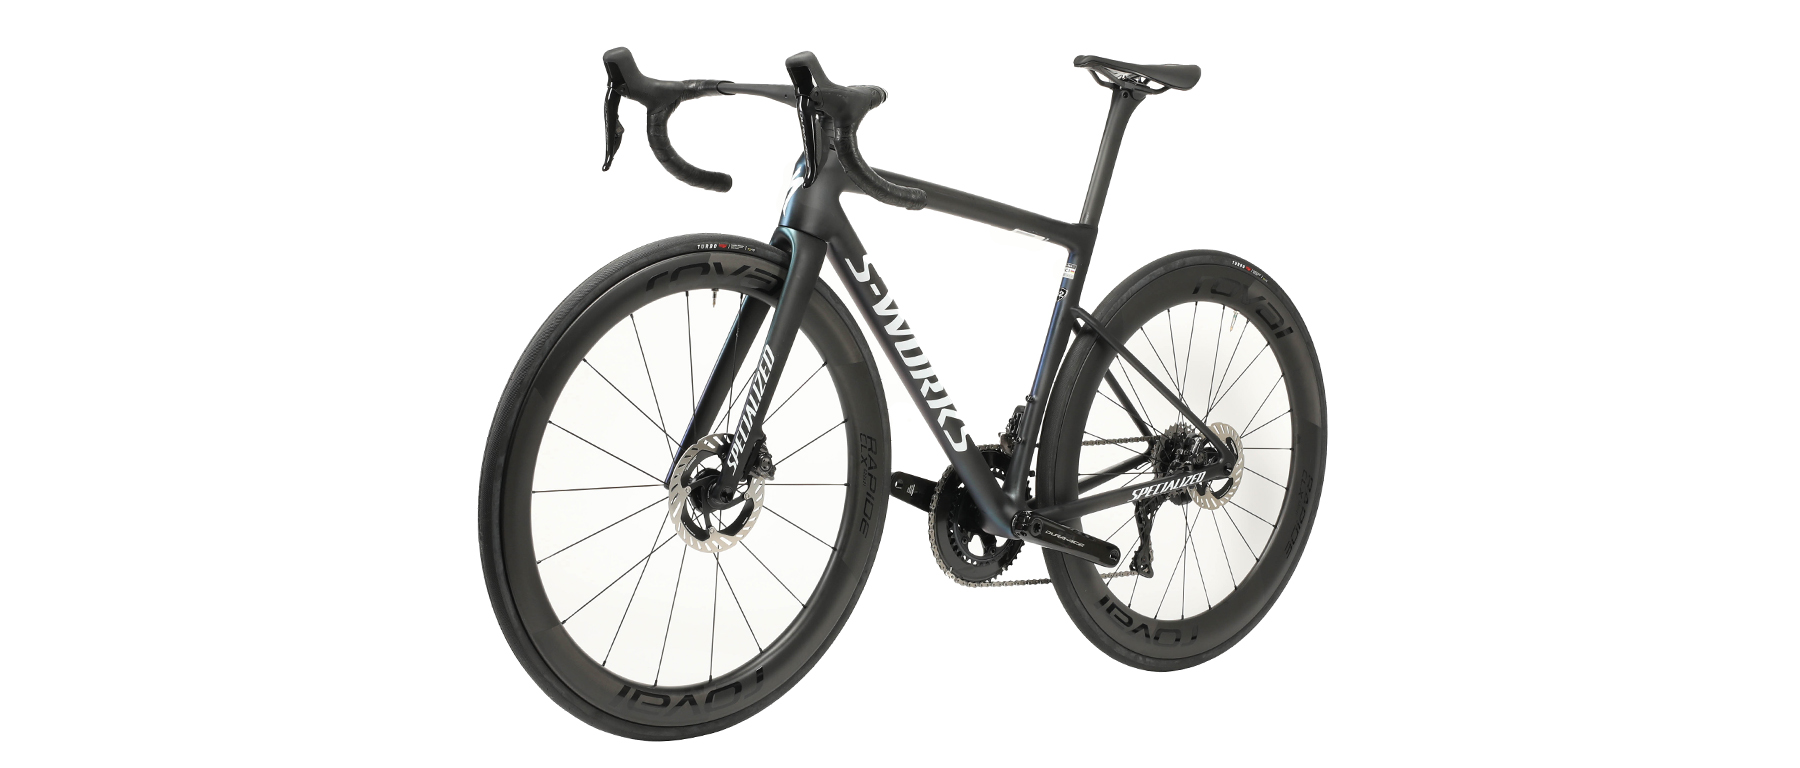 Specialized S-Works Tarmac SL8 Dura-Ace Di2 Bicycle